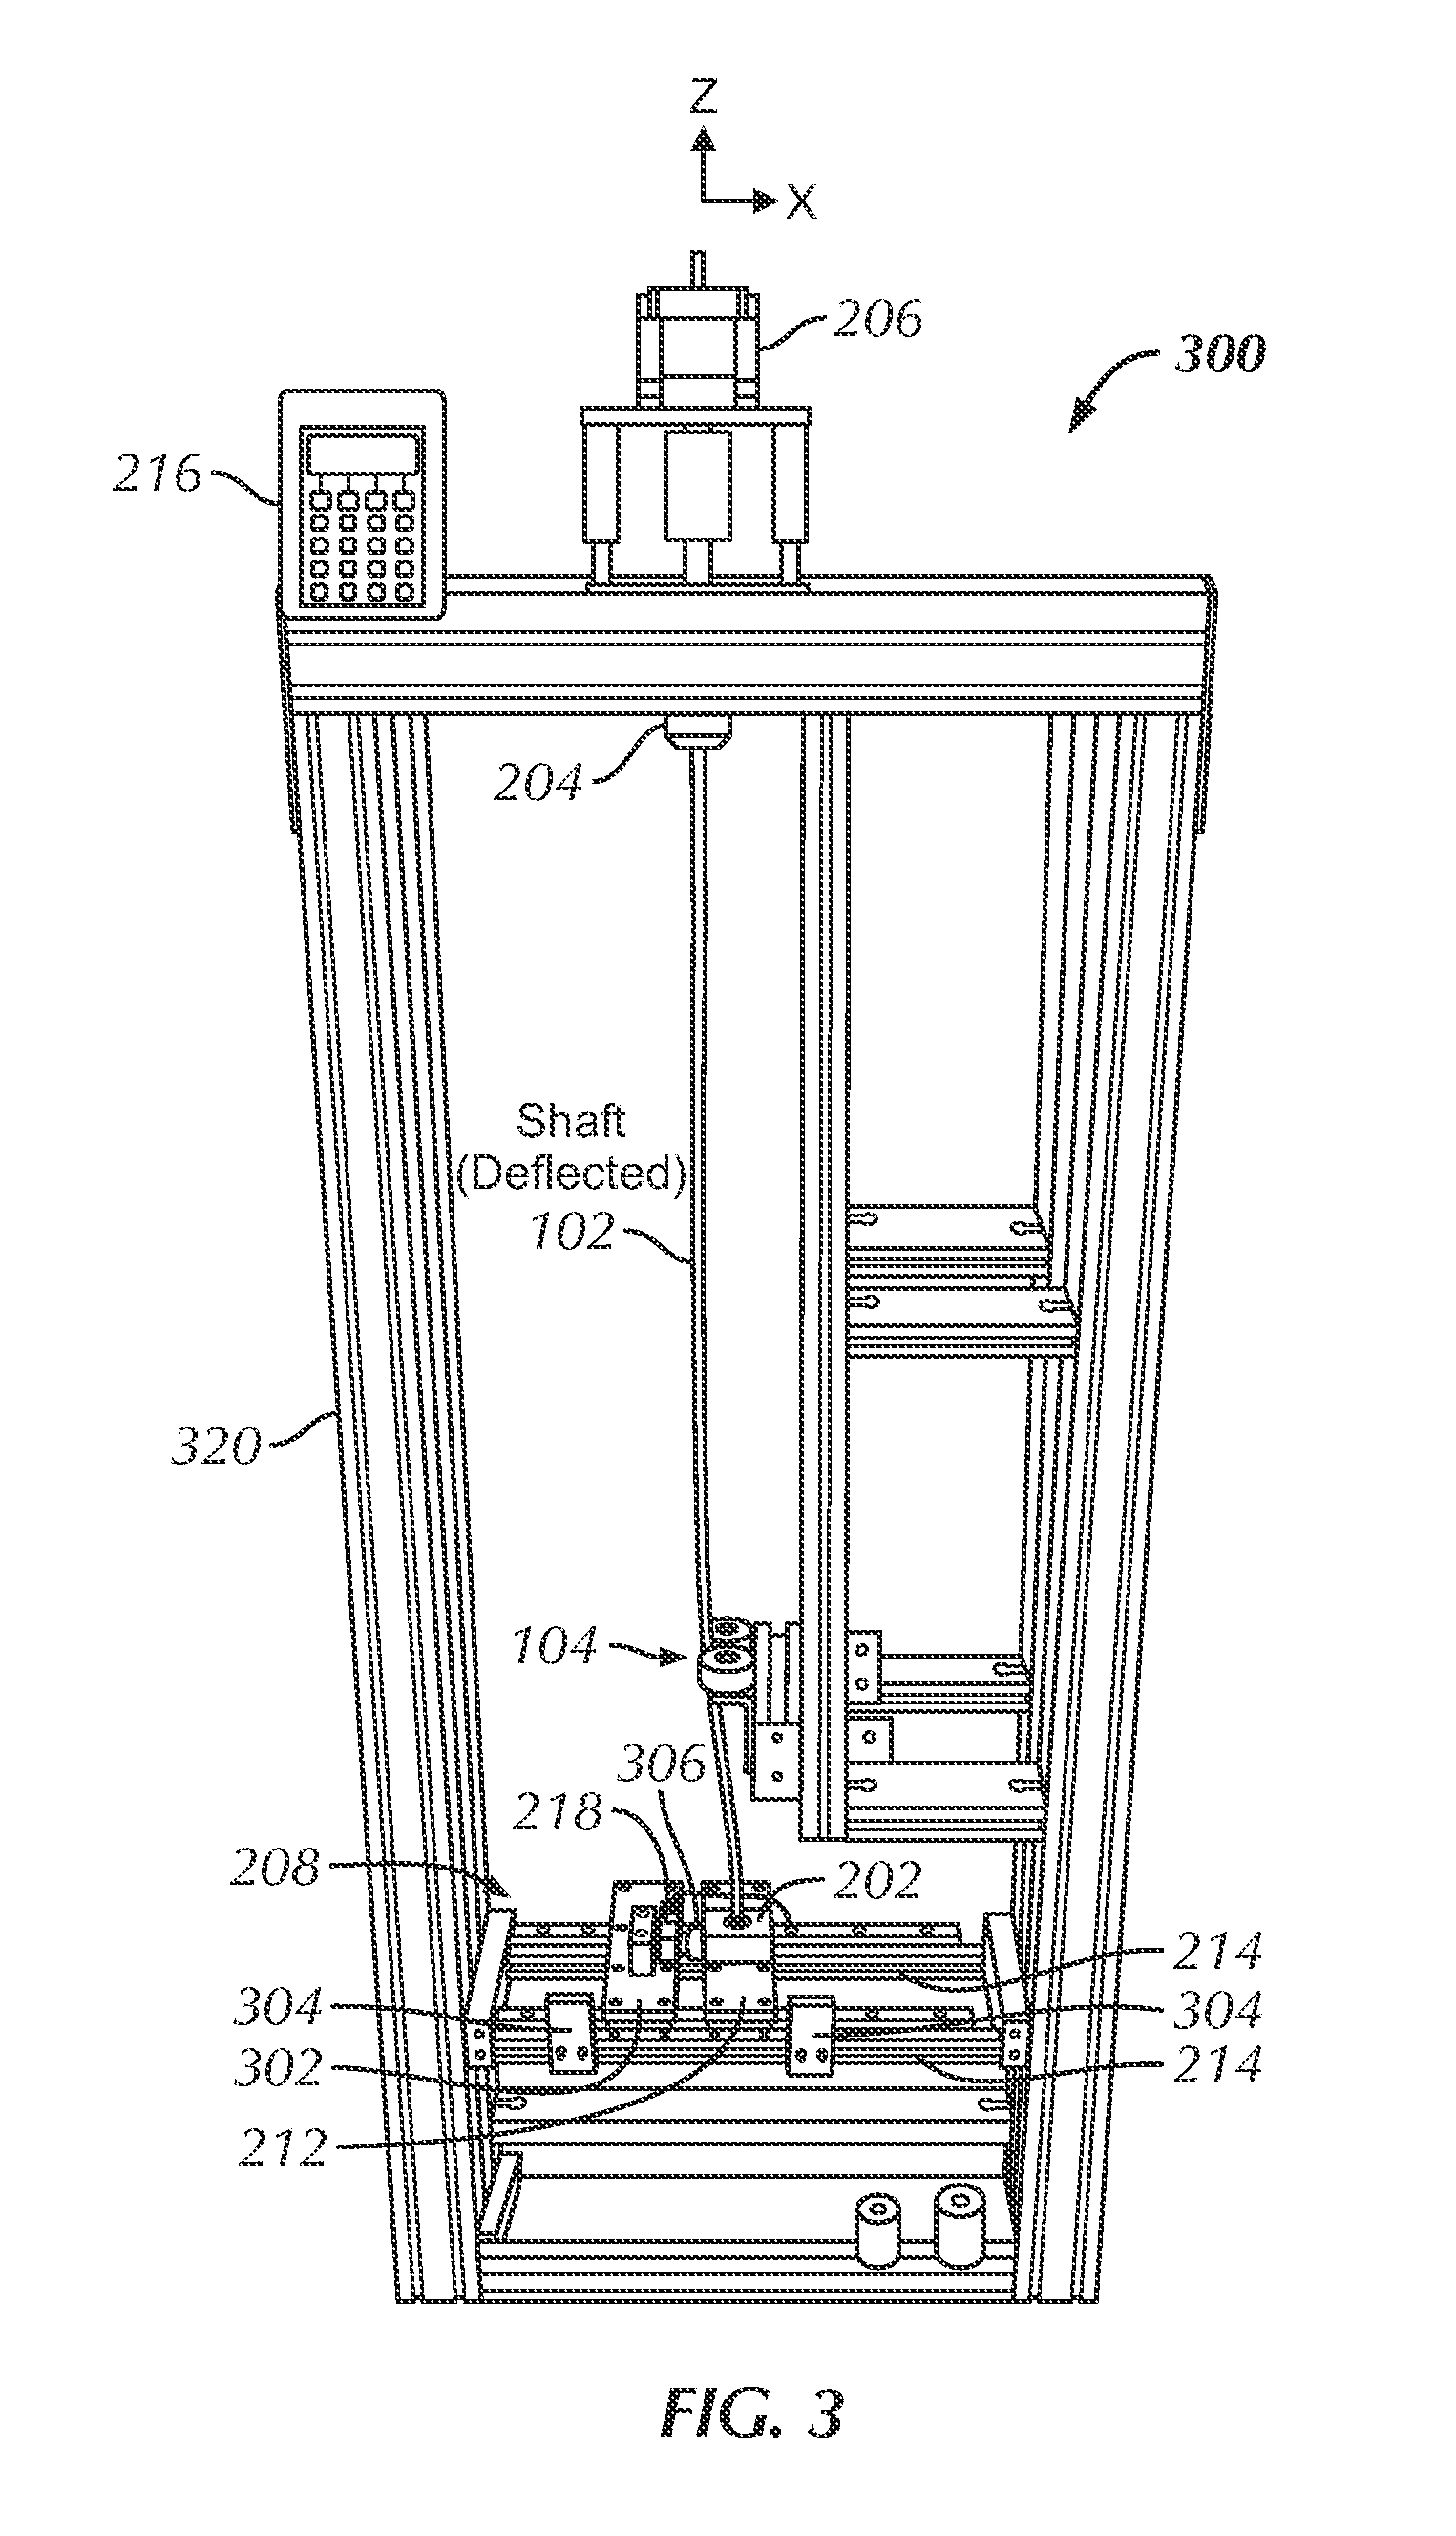 Method and Apparatus for Testing Shafts